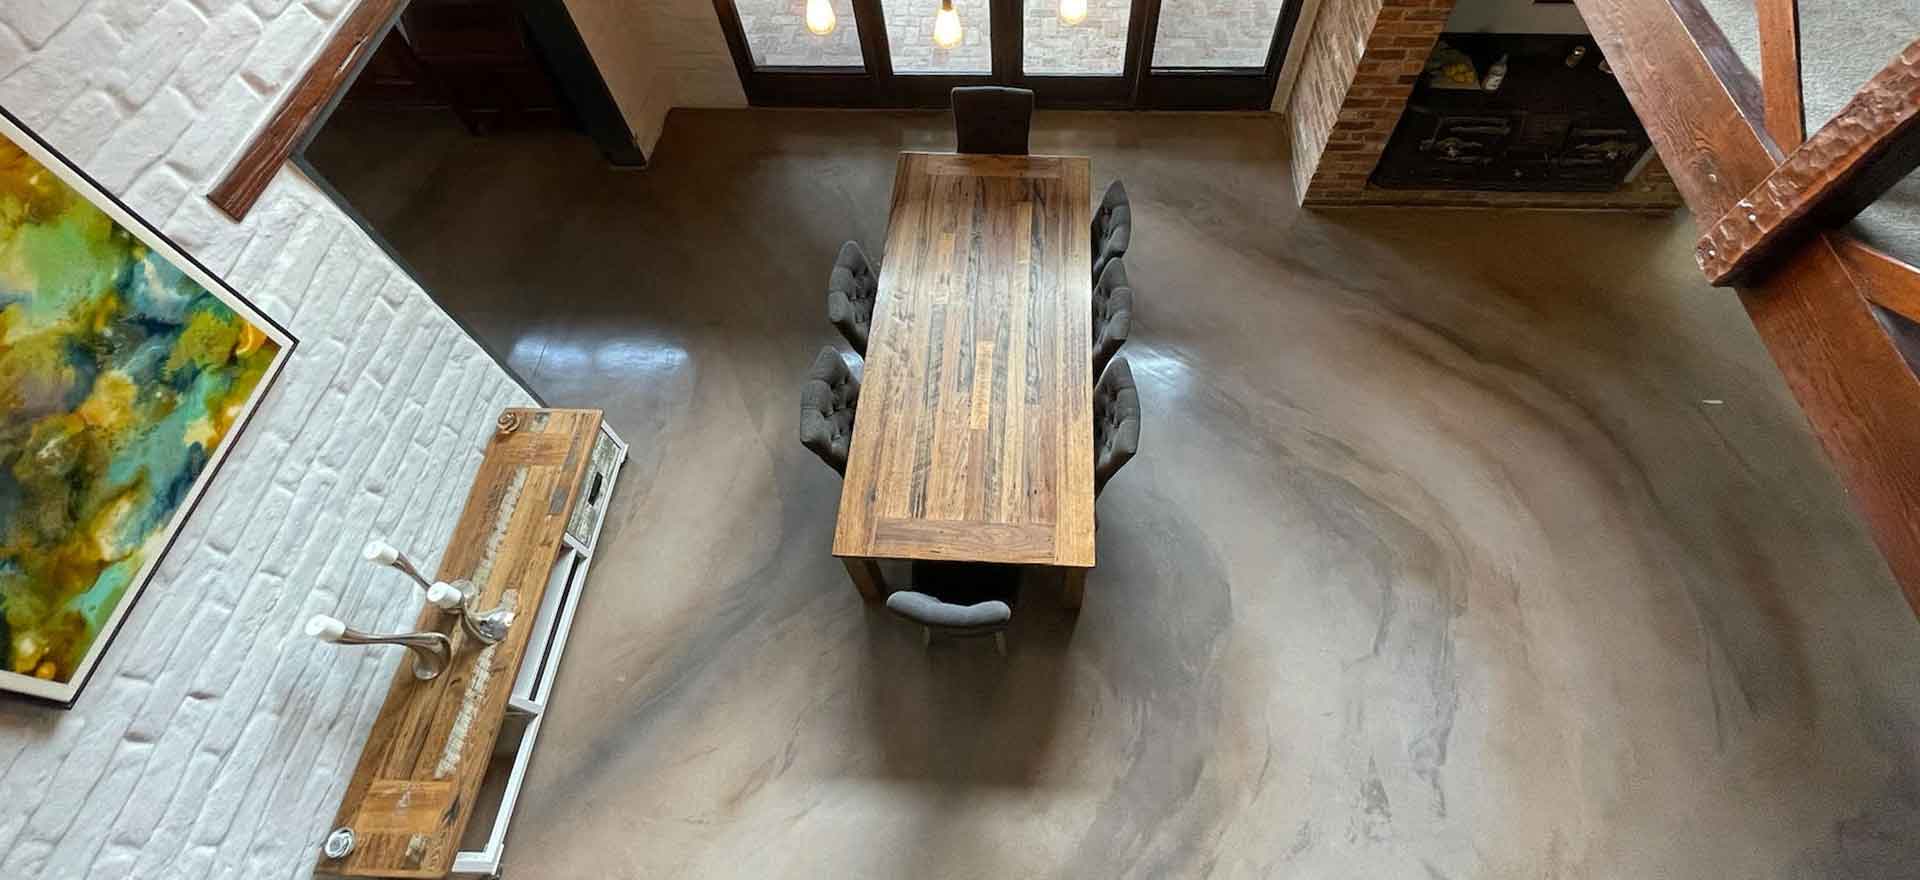 Designing a Tough Yet Beautiful Floor for a Farmhouse